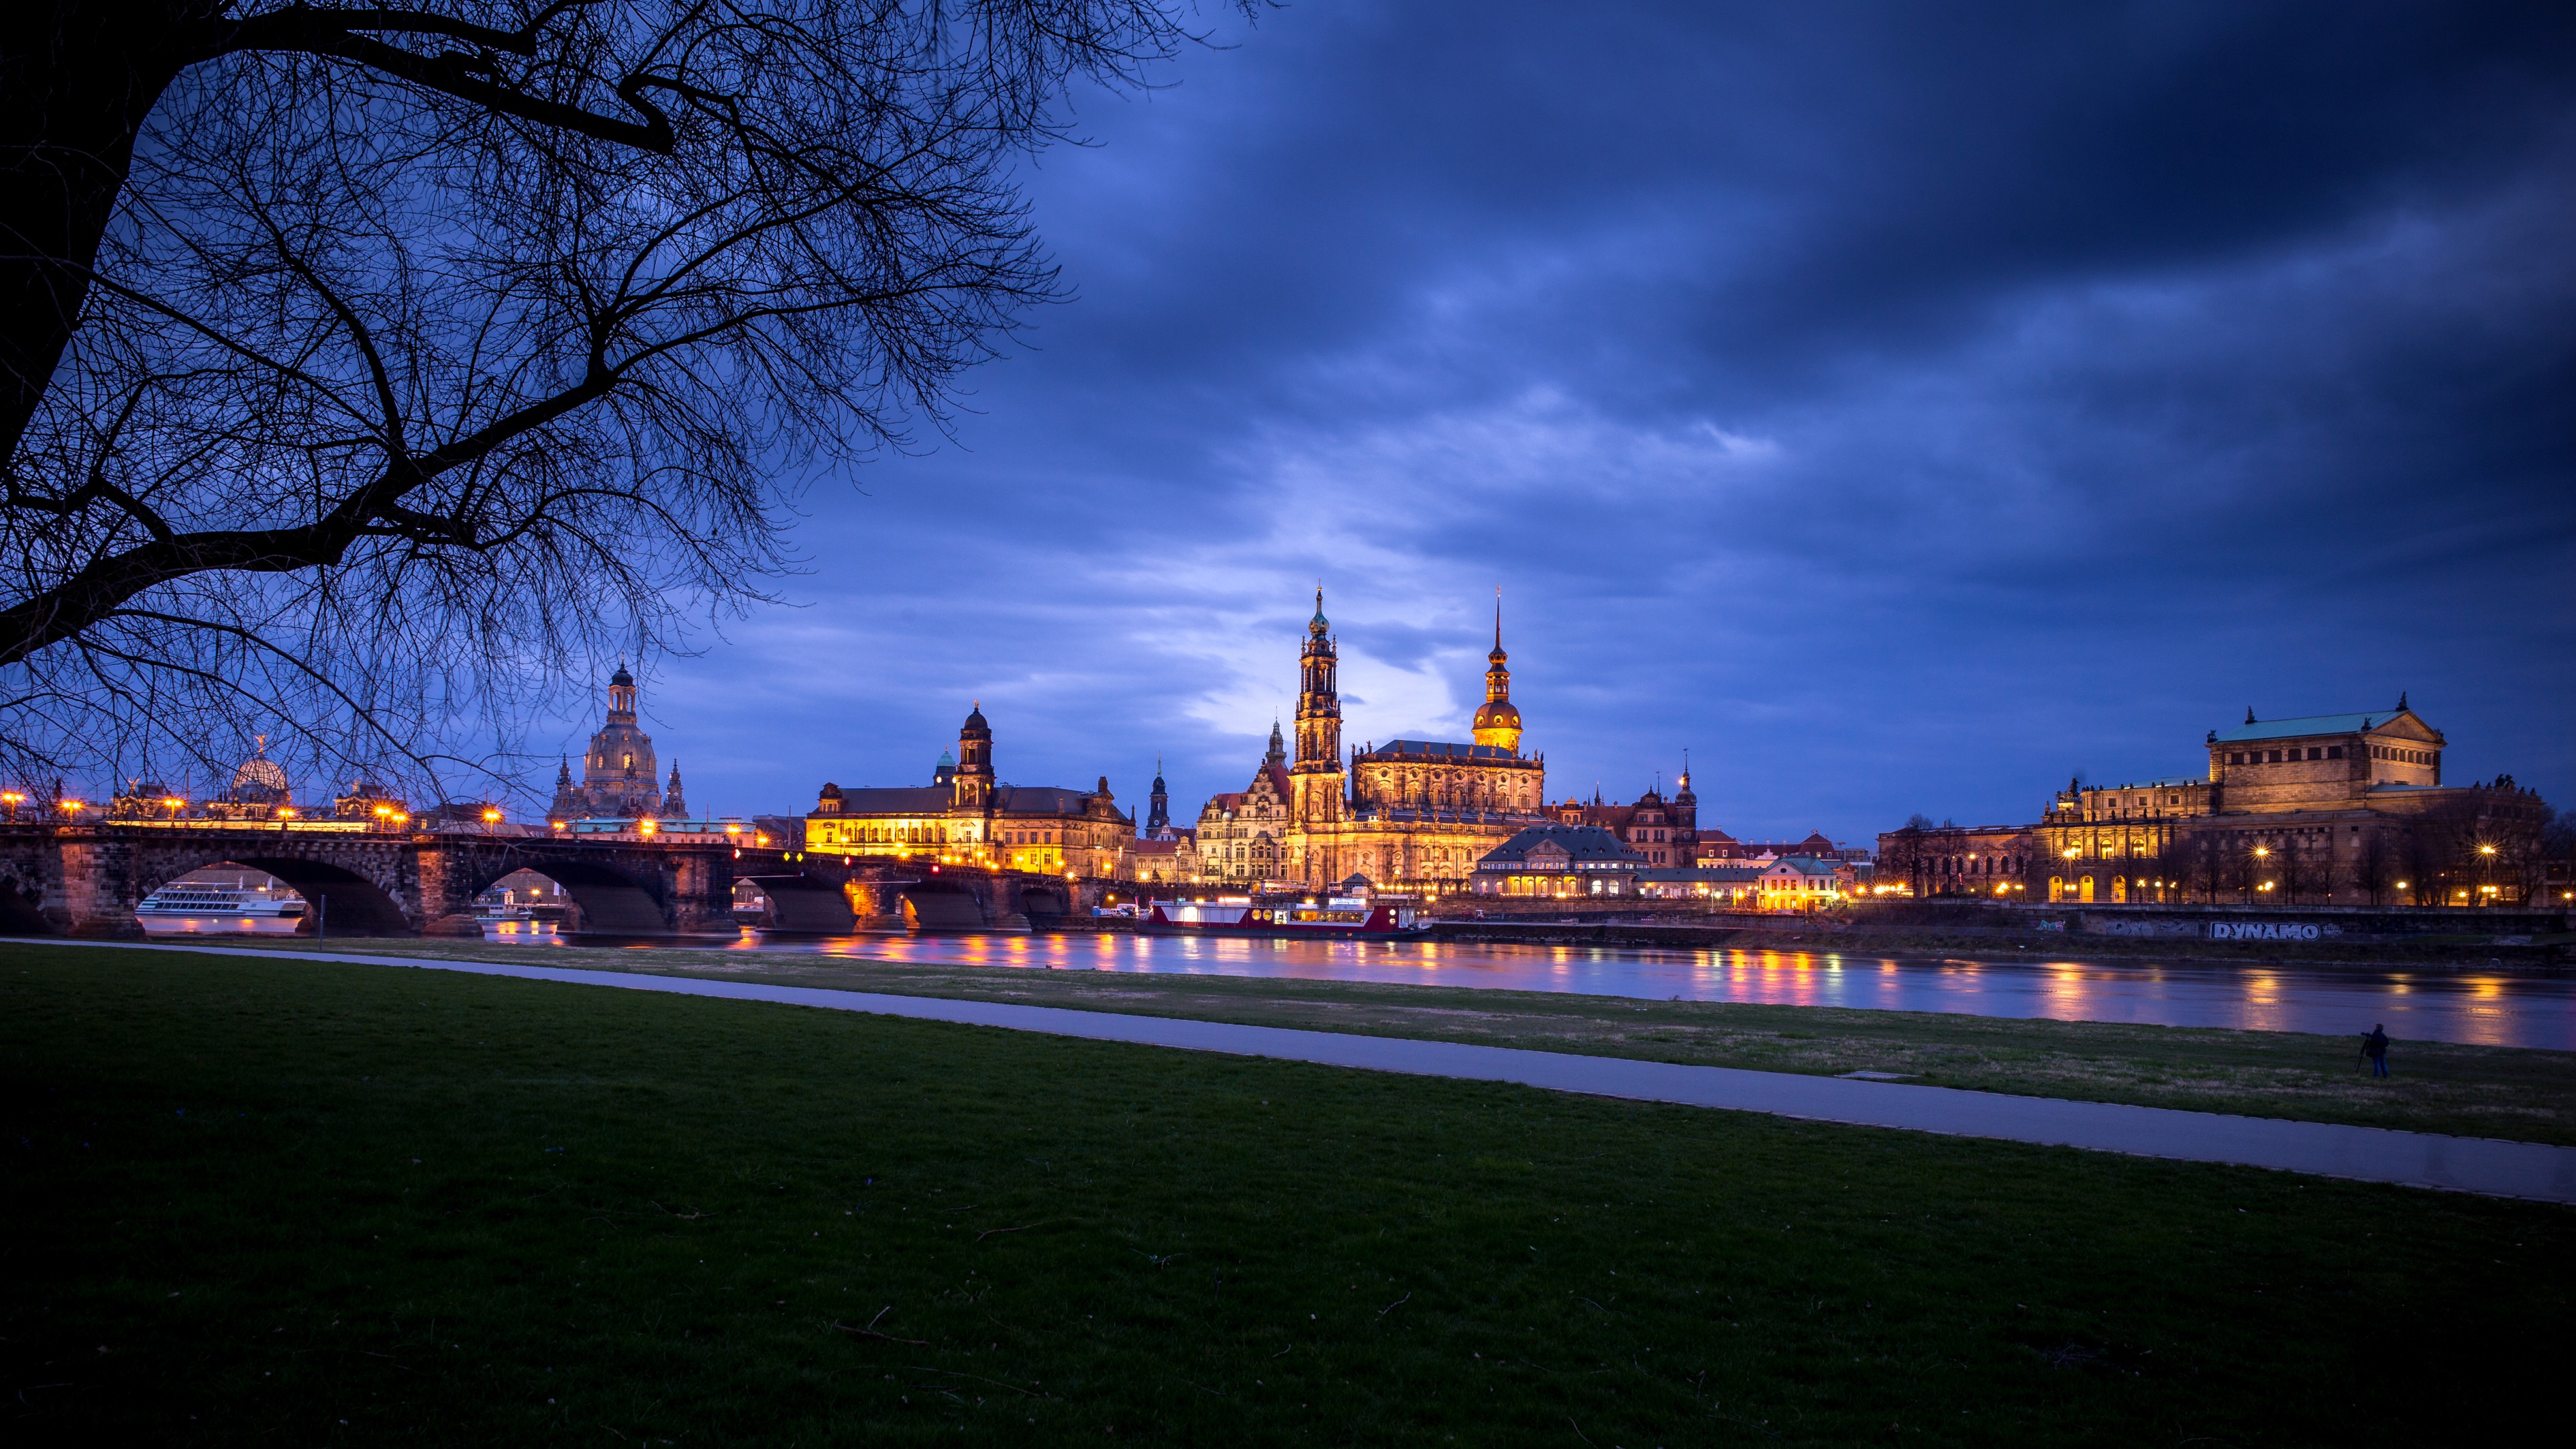 General 3840x2160 building house city cityscape Dresden Germany evening lights cathedral clouds river trees grass bridge reflection old building ship path church tower long exposure